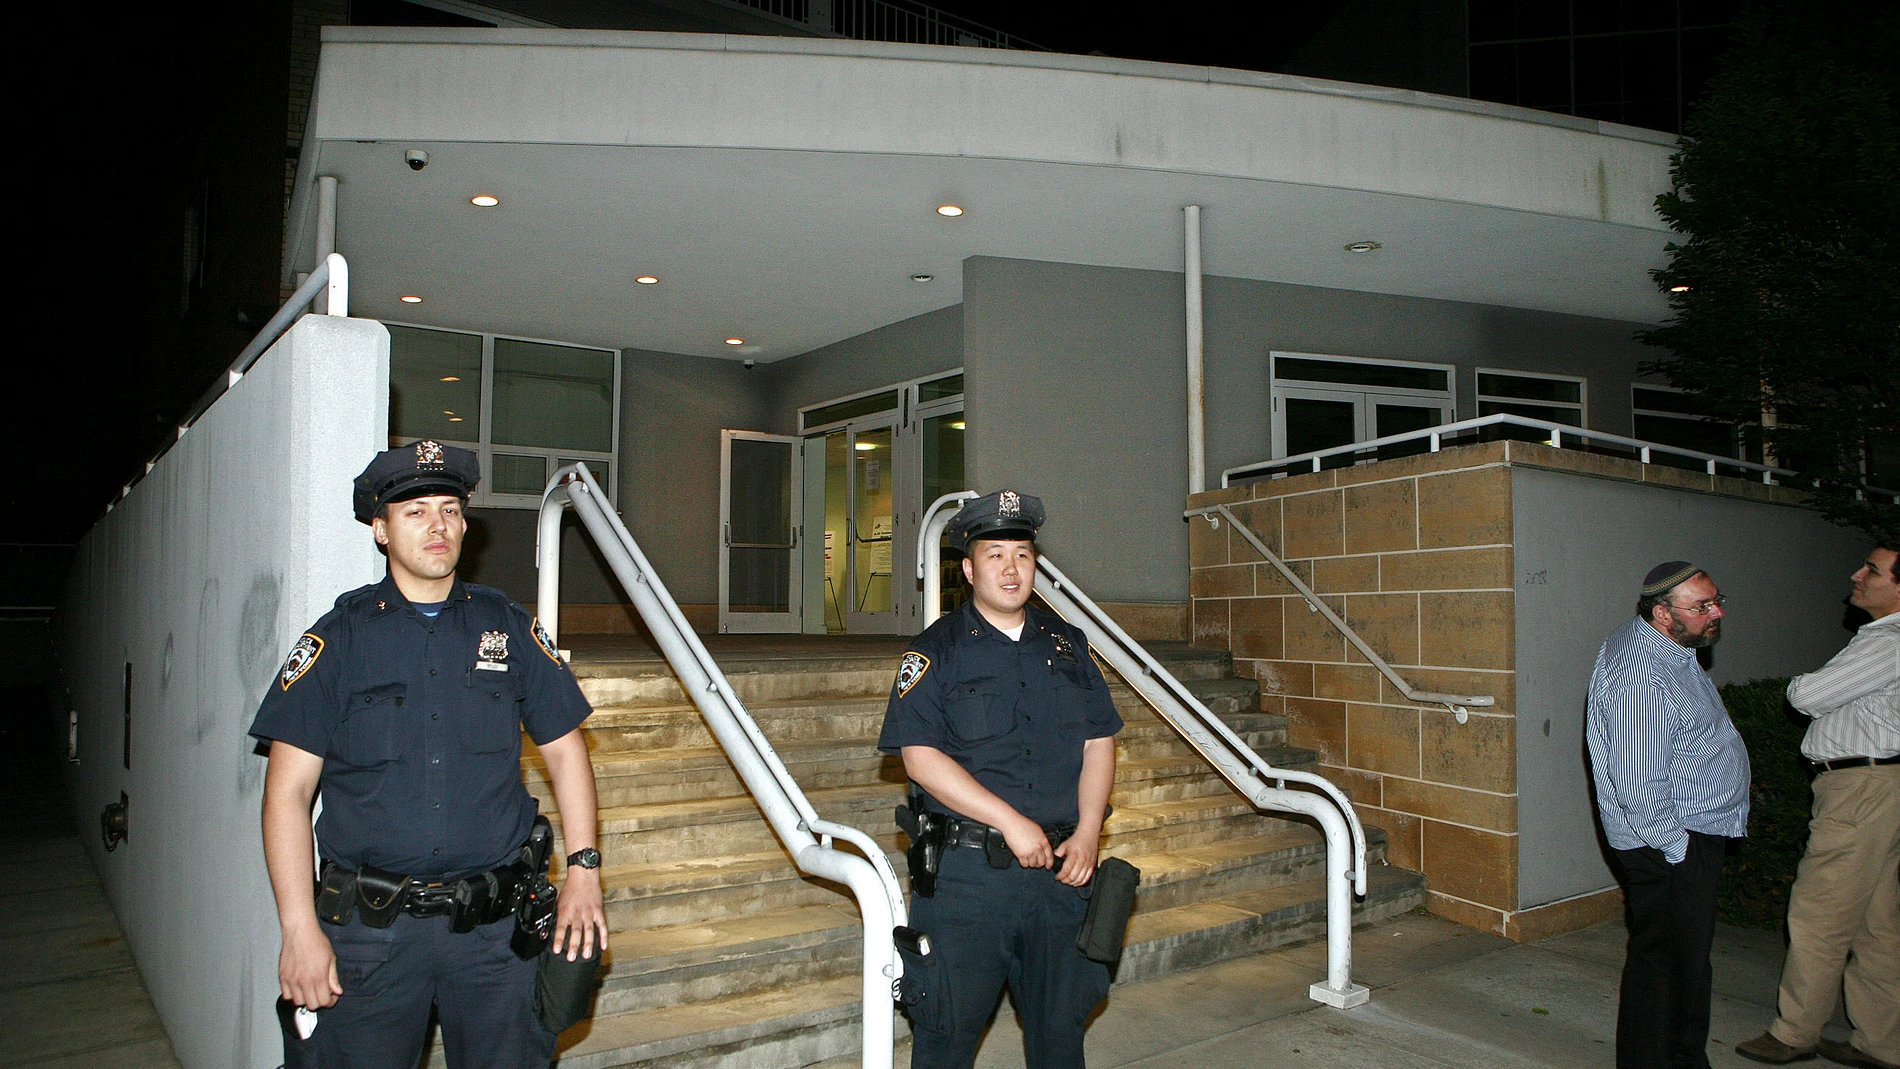 FILE - New York Police officers stand outside the Riverdale Jewish Center in the Bronx section in New York where alleged terrorists attempted to plant bombs in a plot which was foiled by police and FBI Wednesday, May, 20, 2009 The four men snared in an infamous post-9/11 terrorism sting were ordered freed from prison last week, a judge finding that they had been "hapless, easily manipulated and penurious petty criminals" caught up in a plot driven by an overzealous FBI and a dodgy informant. ...